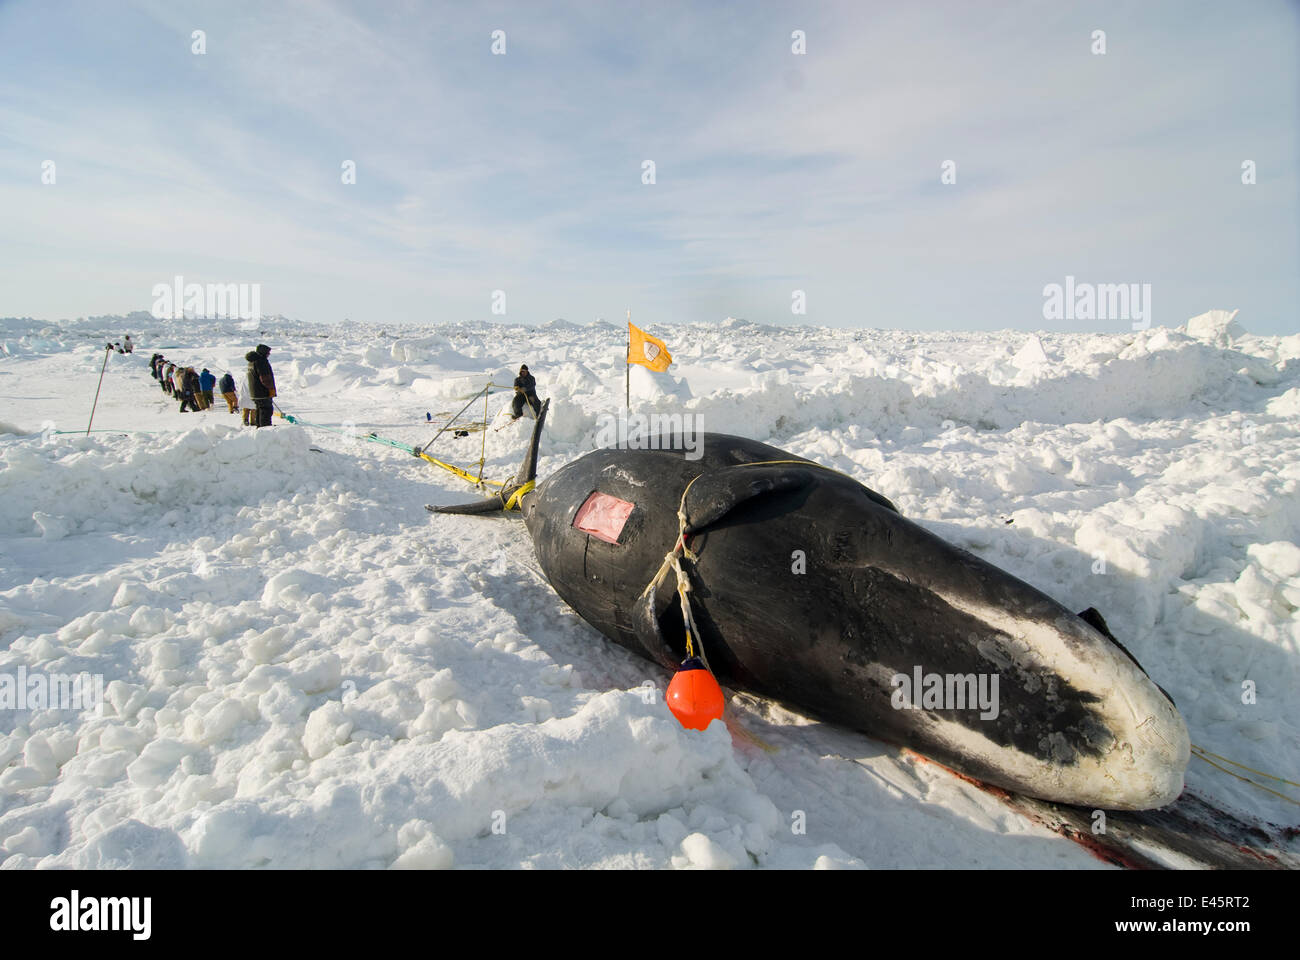 Inupiaq / Inuit subsistence whalers pulling a Bowhead whale (Balaena mysticetus) catch onto the pack ice using a block and tackle pulley system, Chukchi Sea, off the coastal village of Barrow, Alaska, USA, May 2009 Stock Photo